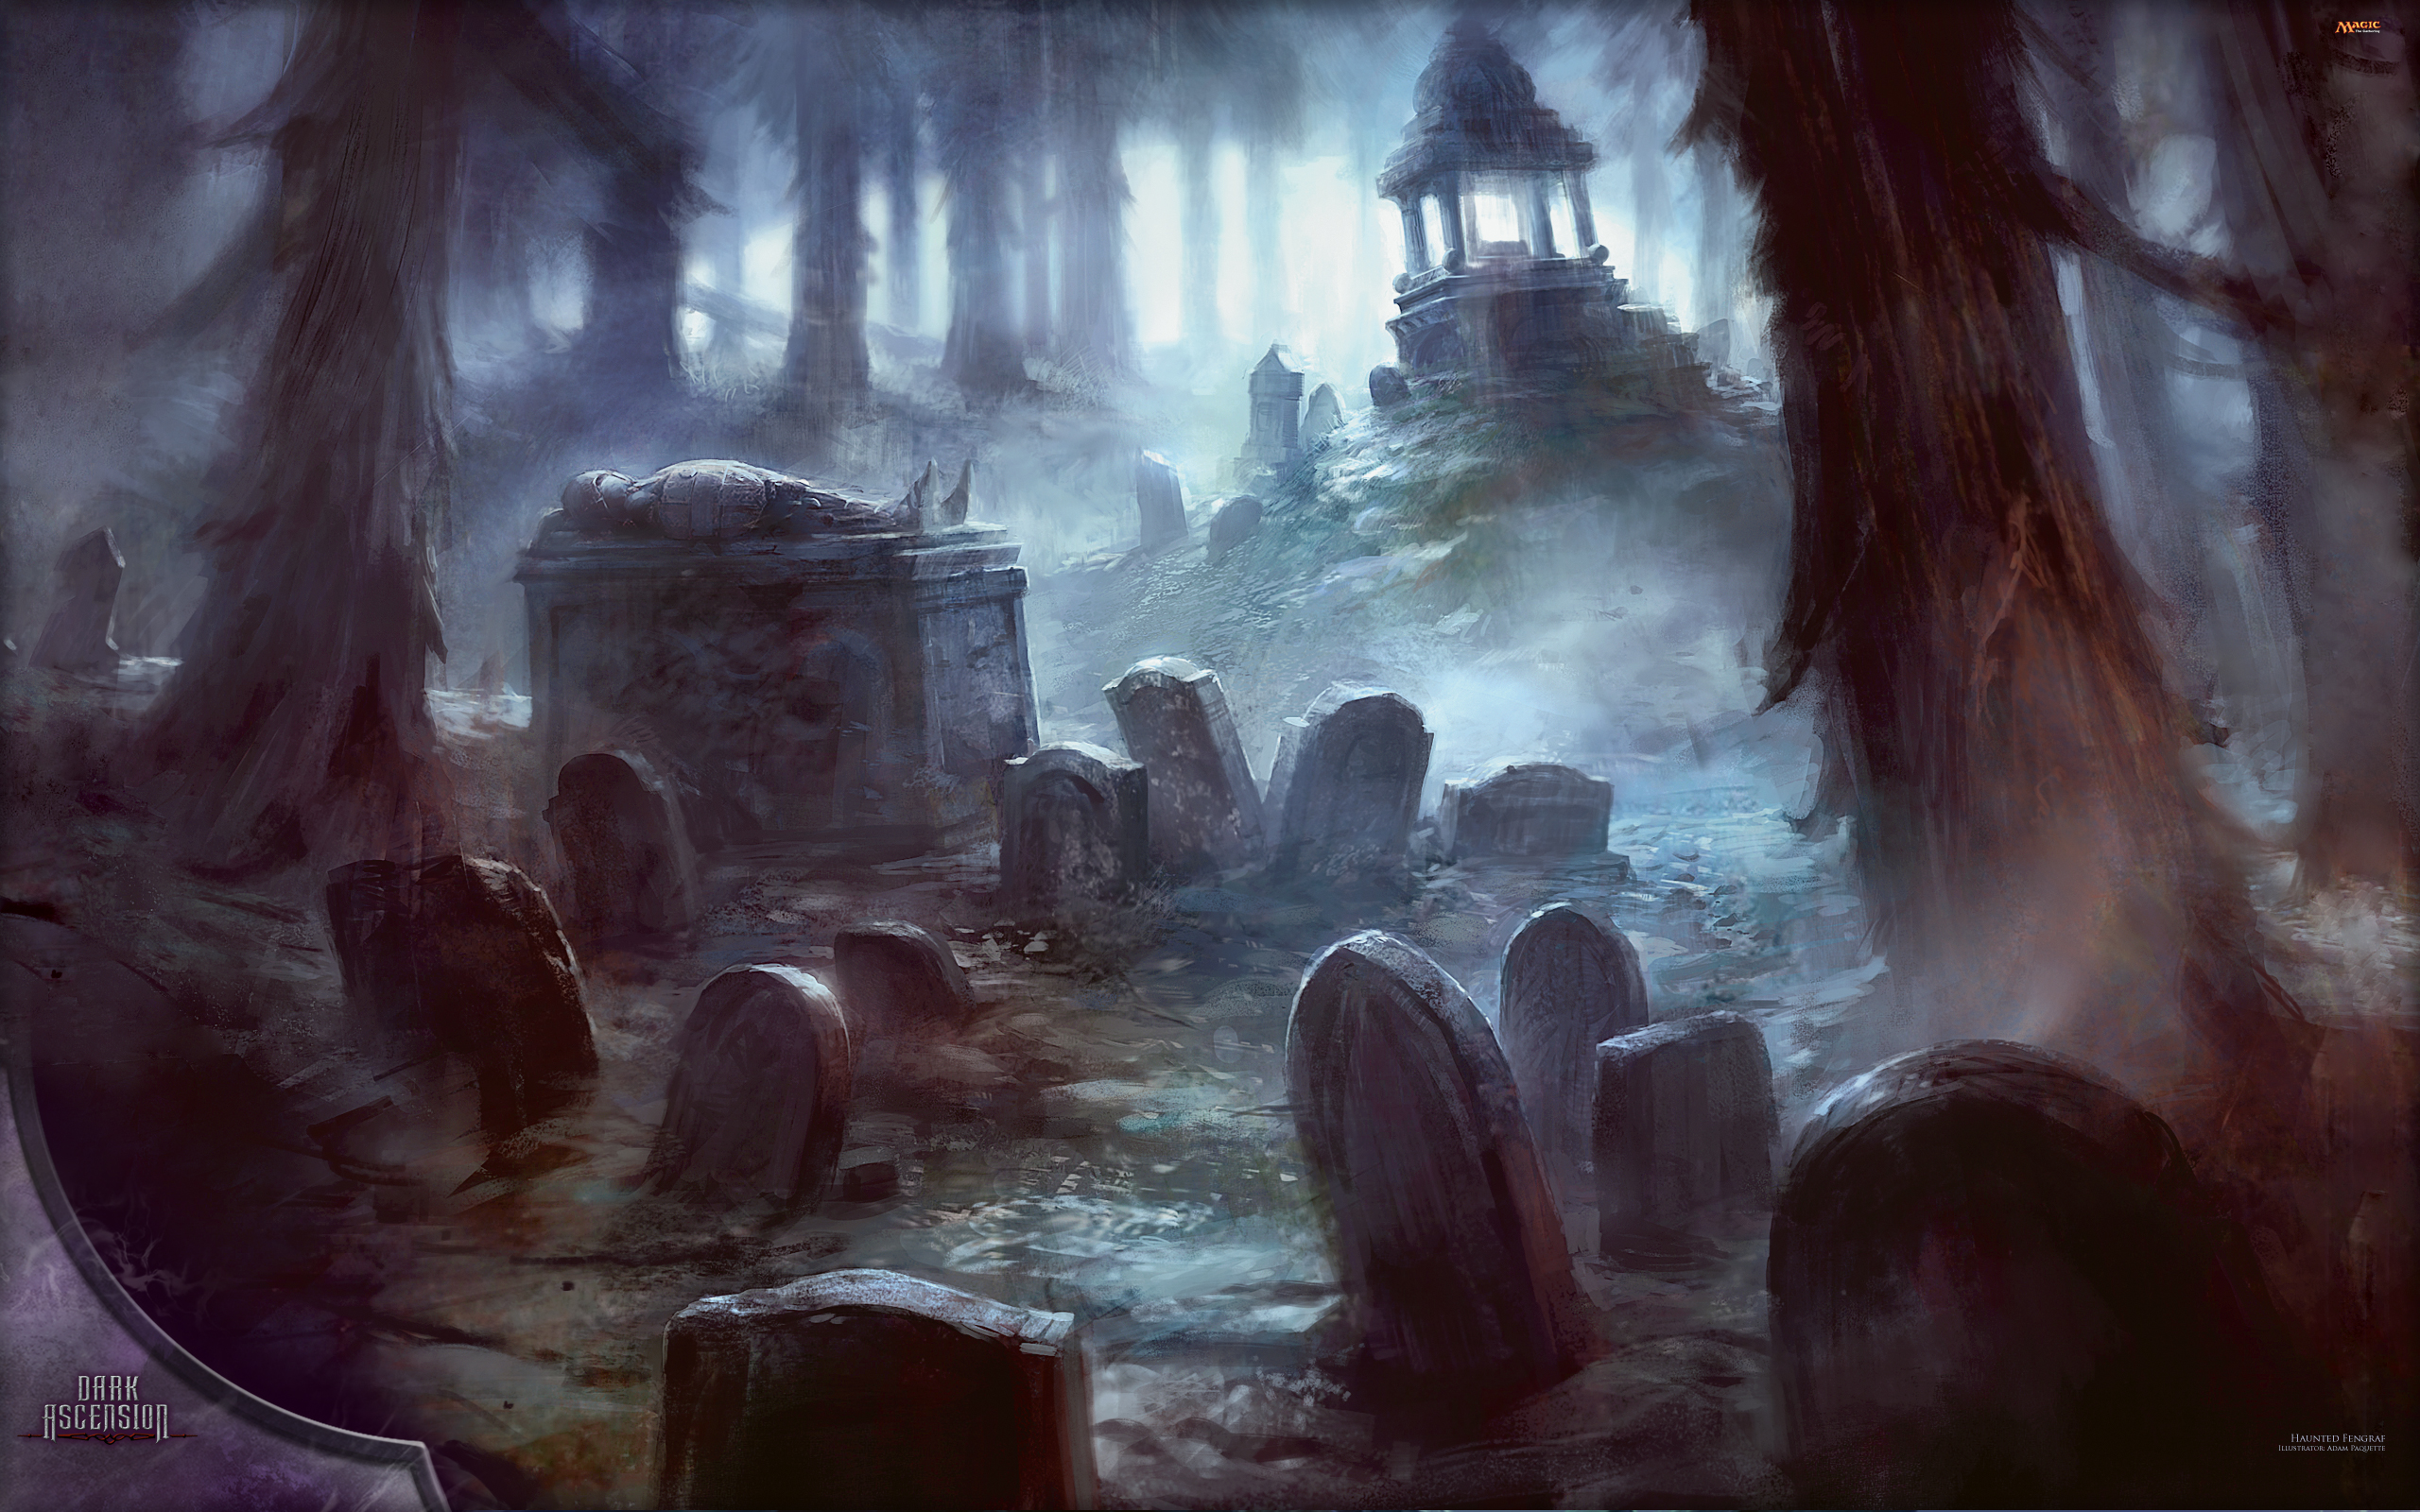 New Scary WallPapers - 35 Dark Horror HD Backgrounds - The Art ...